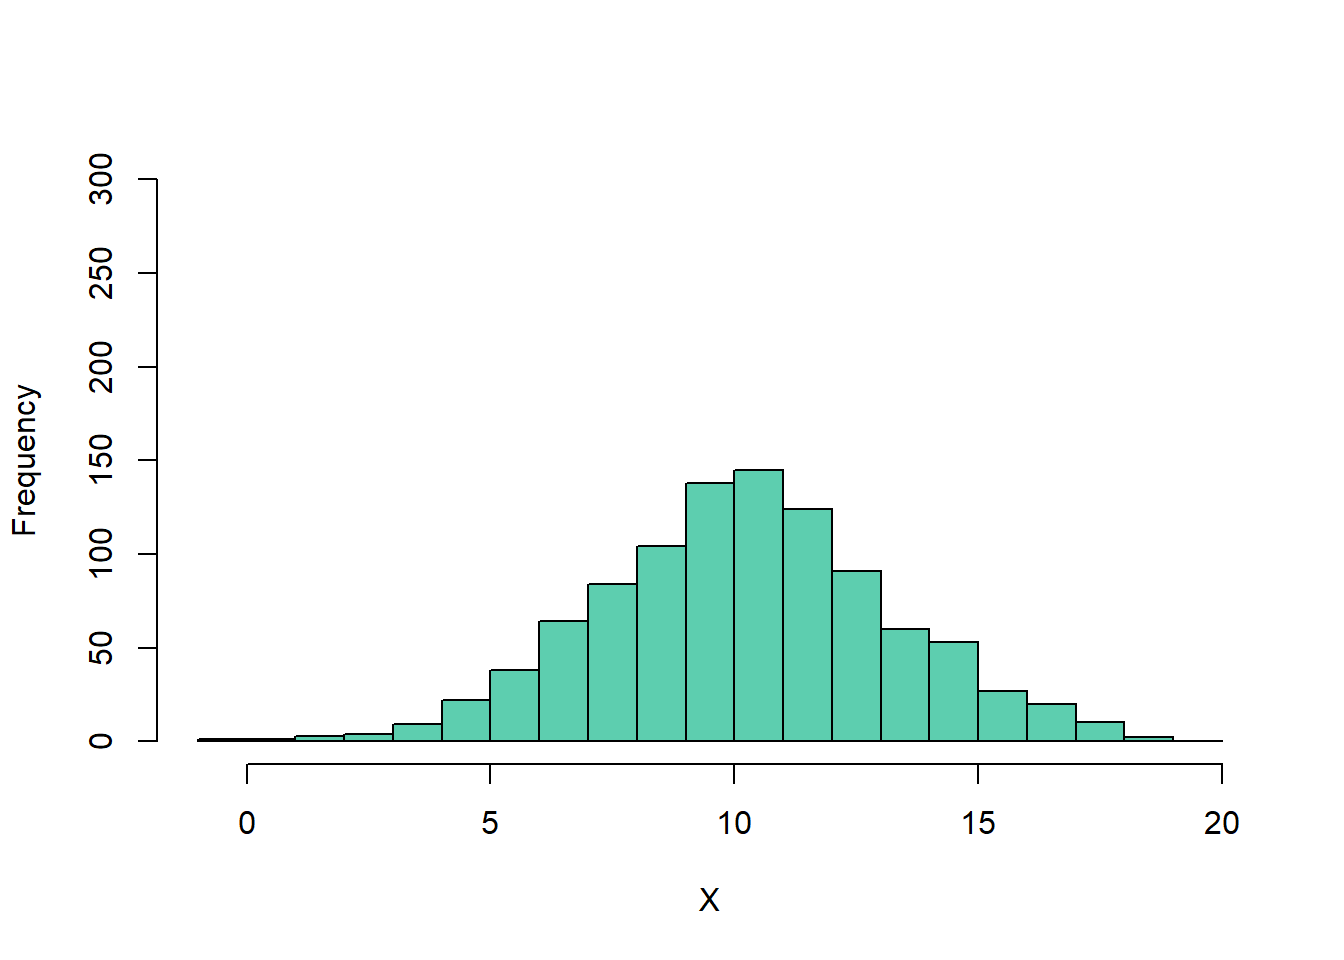 Histograms showing hypothetical distributions of 1,000 observations with the same mean, median, and mode (10) but with low variability (top) and high variability (bottom).